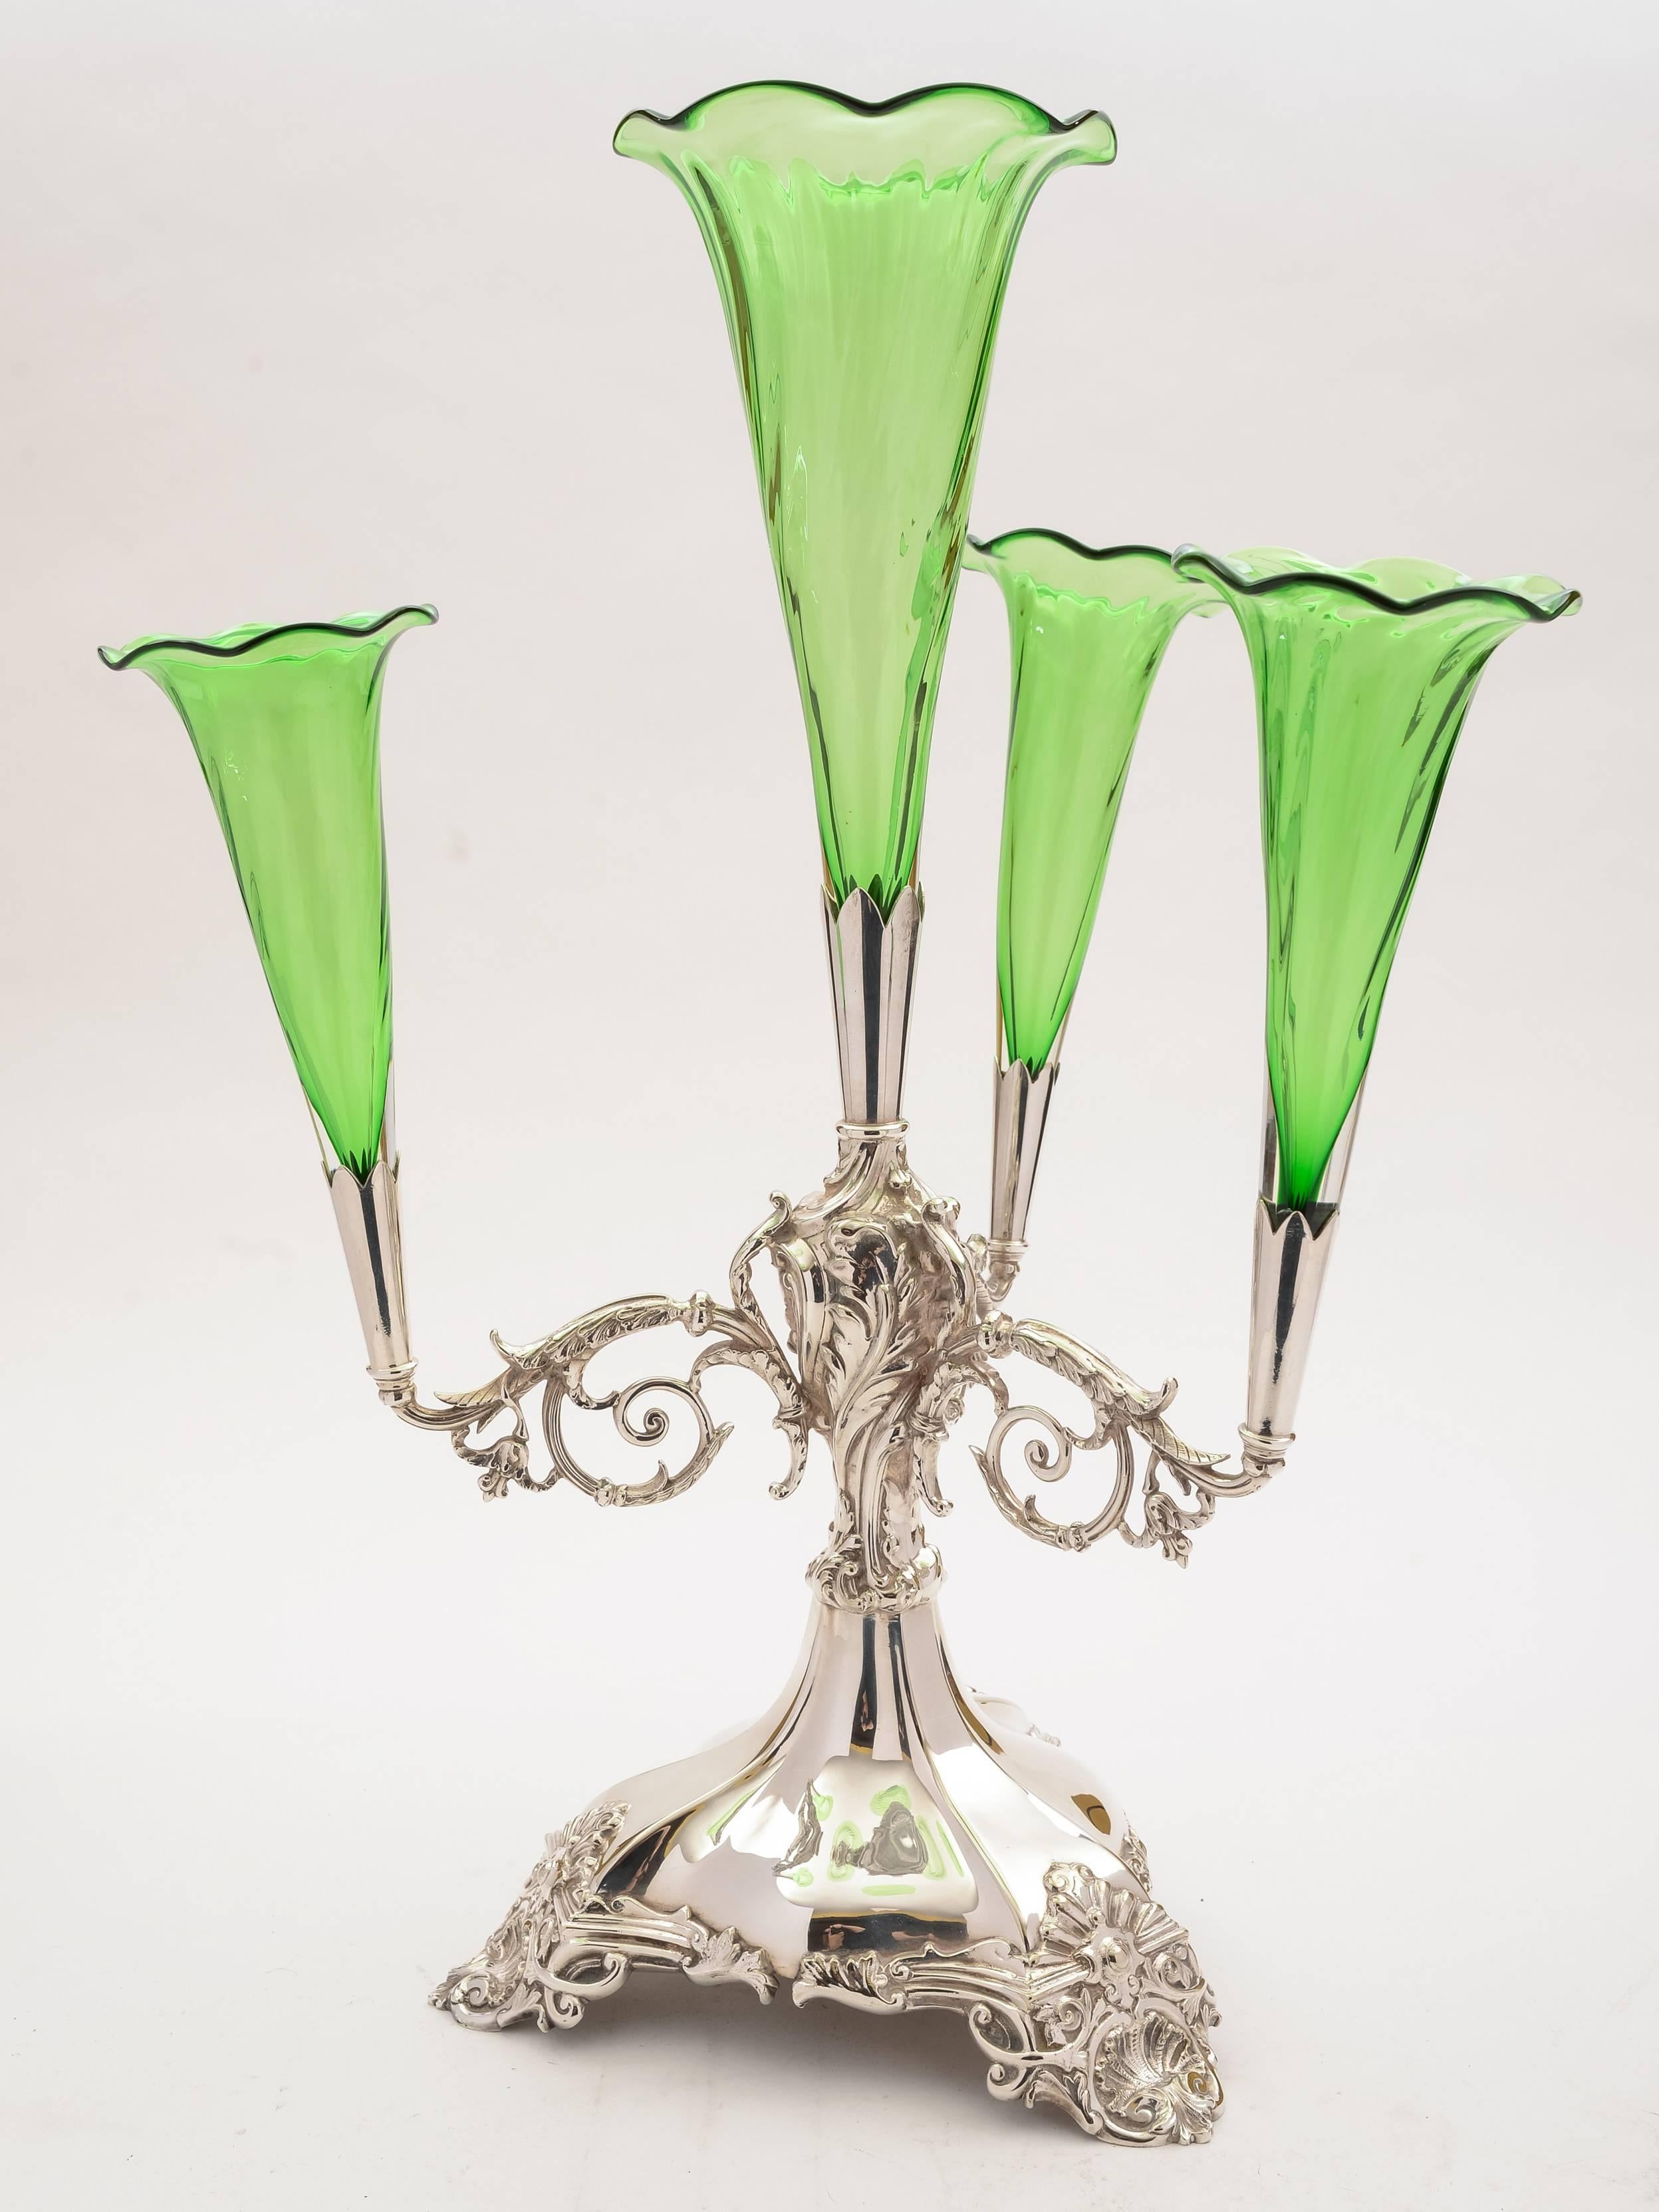 A superb English Edwardian silver plated eperne with embossed branches which hold 4 green wrythen-style glass trumpets. The base has embossed decoration to the 3 feet. Circa 1905.

FREE worldwide delivery. 

Measurements:
Height: 21" (approx